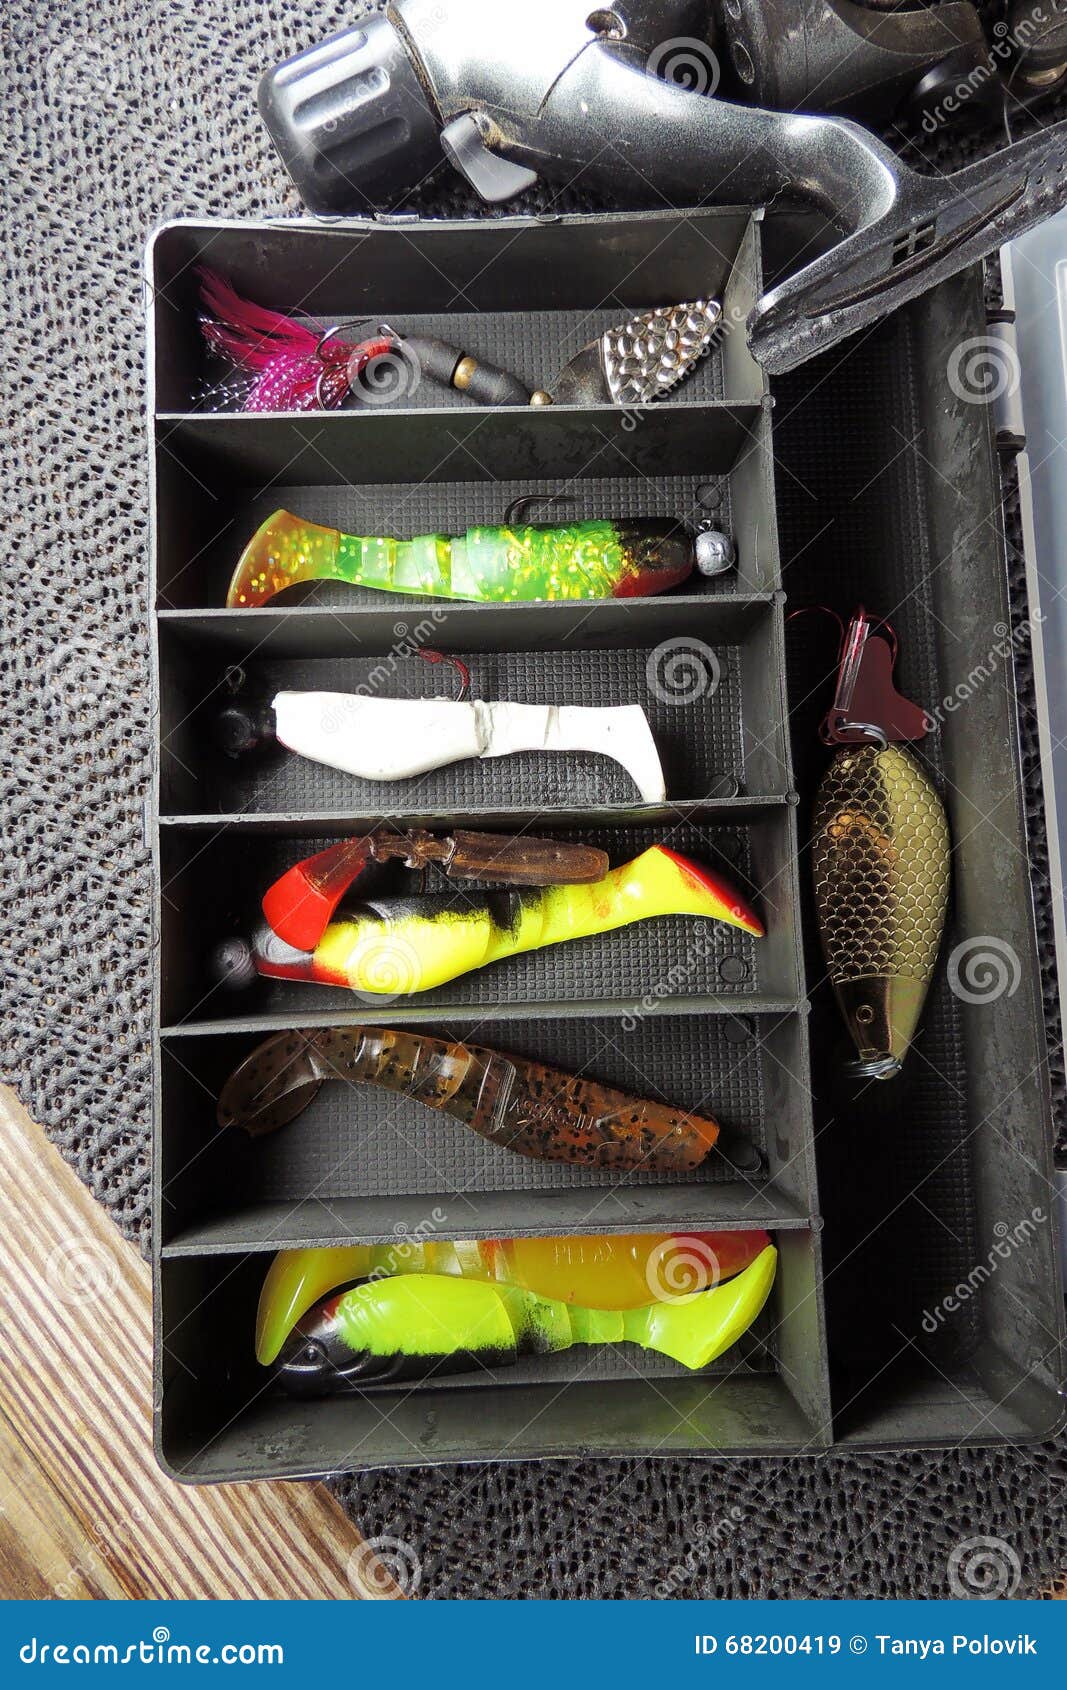 https://thumbs.dreamstime.com/z/silicone-fish-fishing-container-box-gear-68200419.jpg